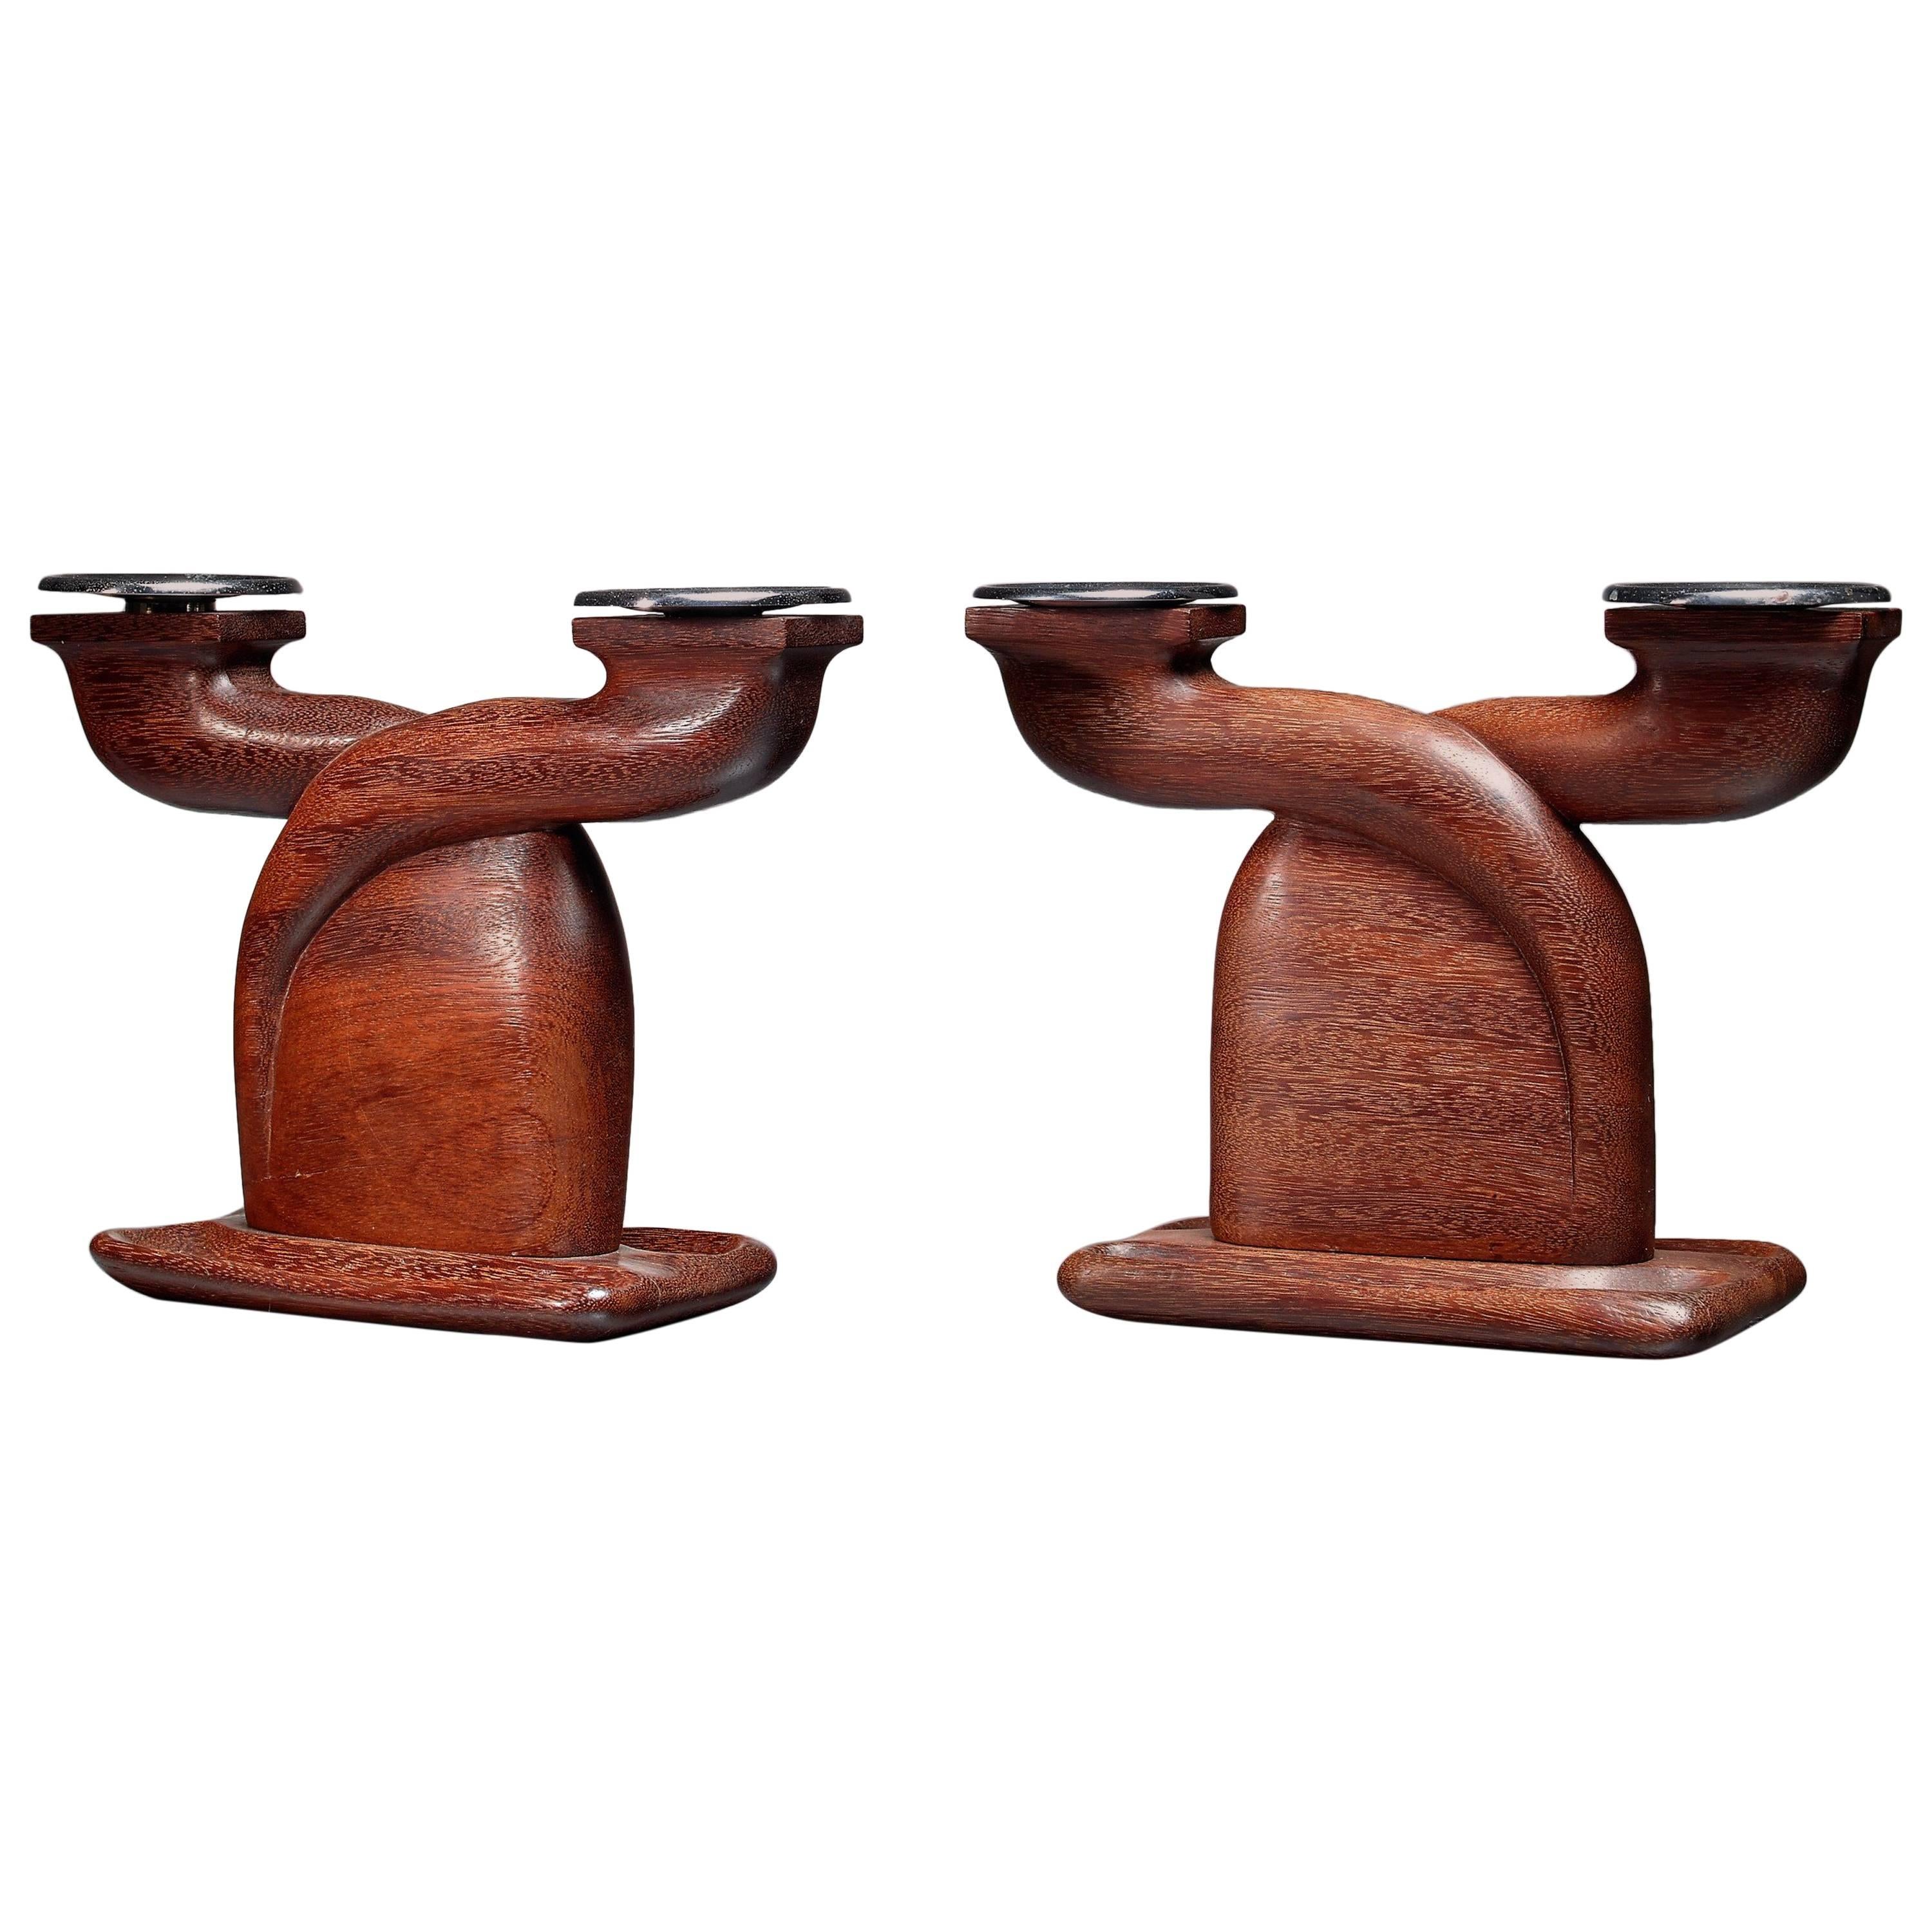 Louis Prodhon Pair of Candleholders in Wenge, France, 1940s